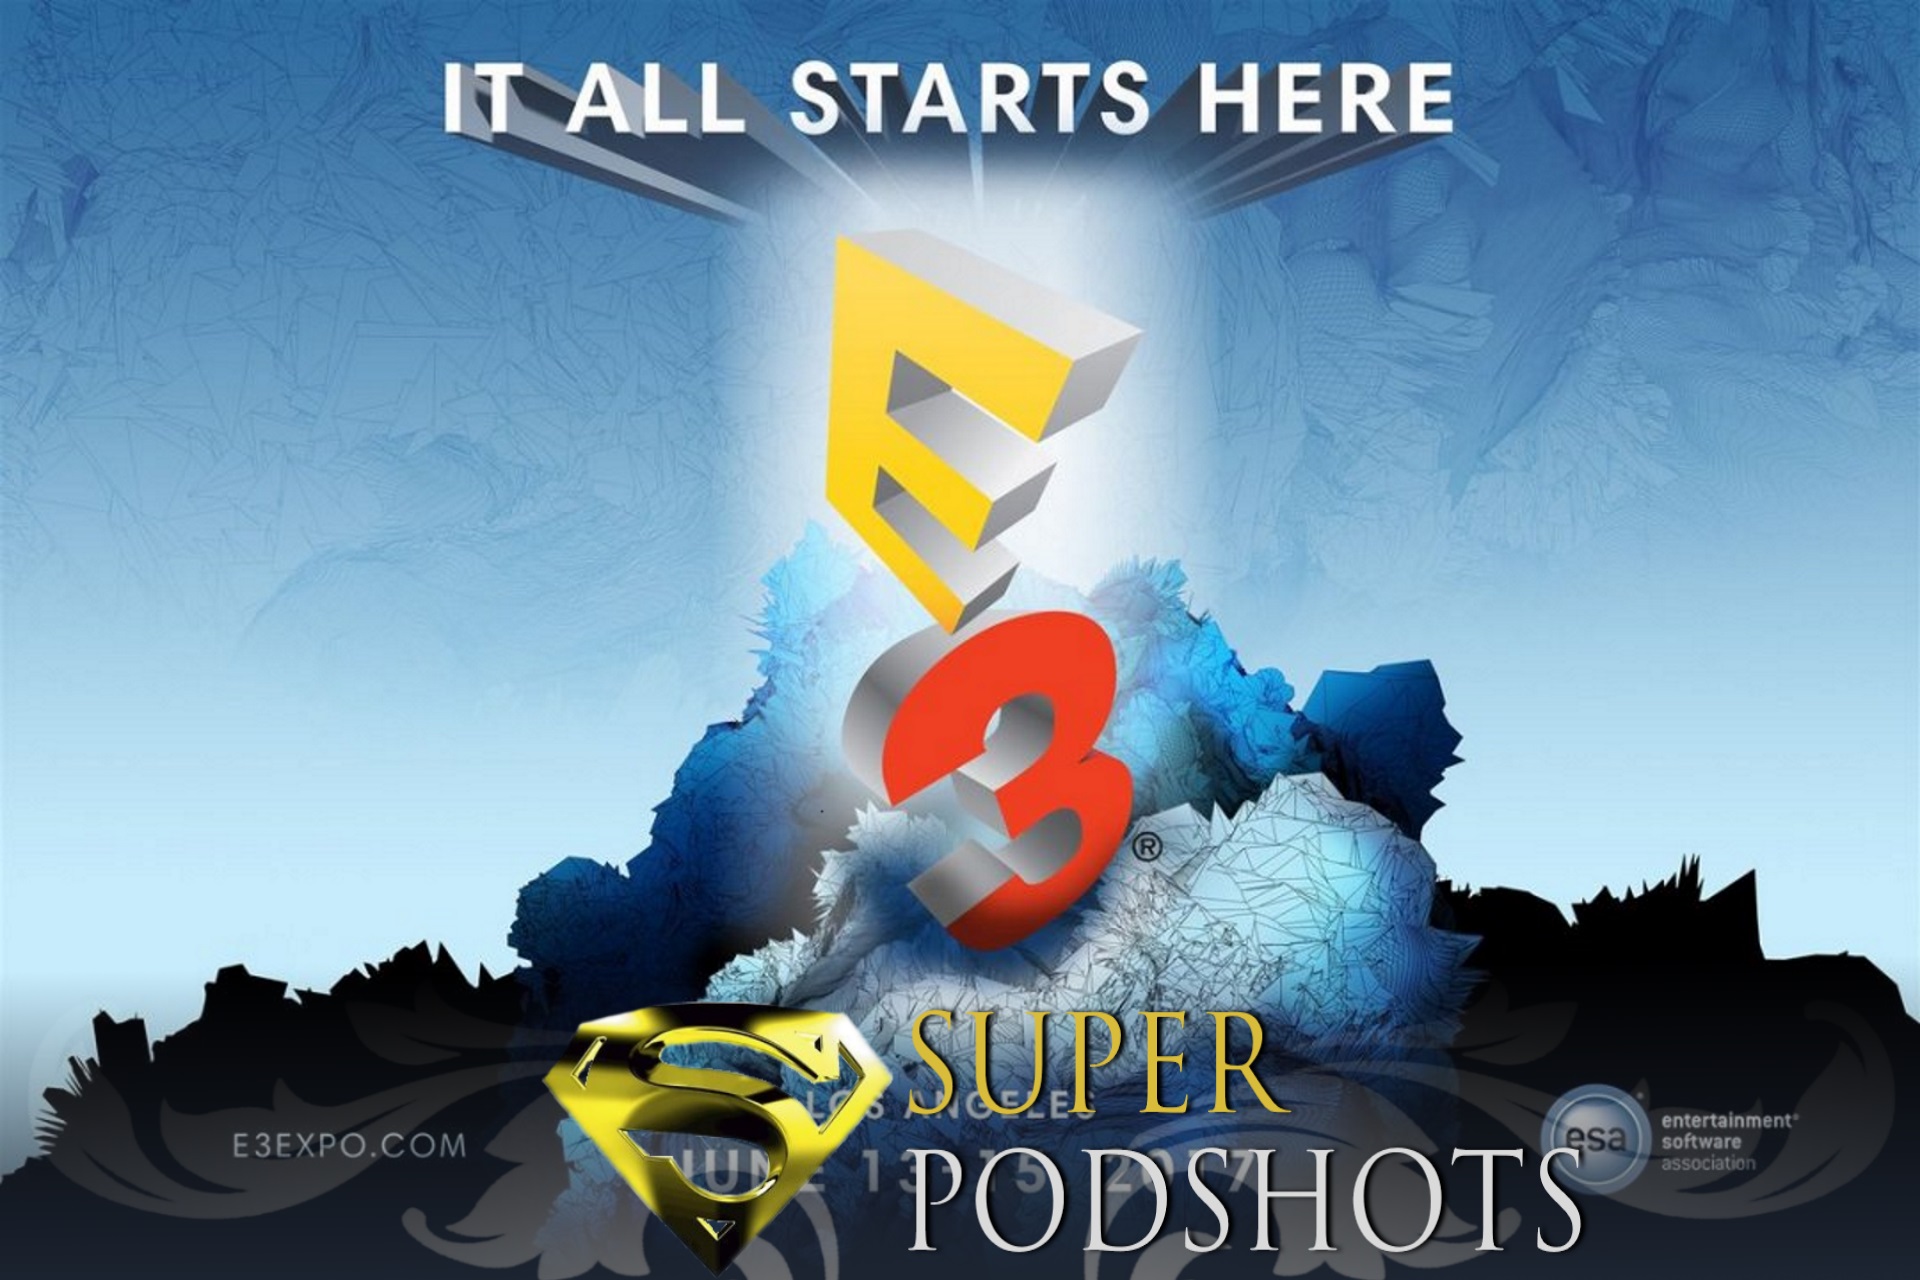 Super Podshots Ep. 72 - E3 2017 Day 3,  Final Thoughts On The Past Week & What Has Xbox Accomplished